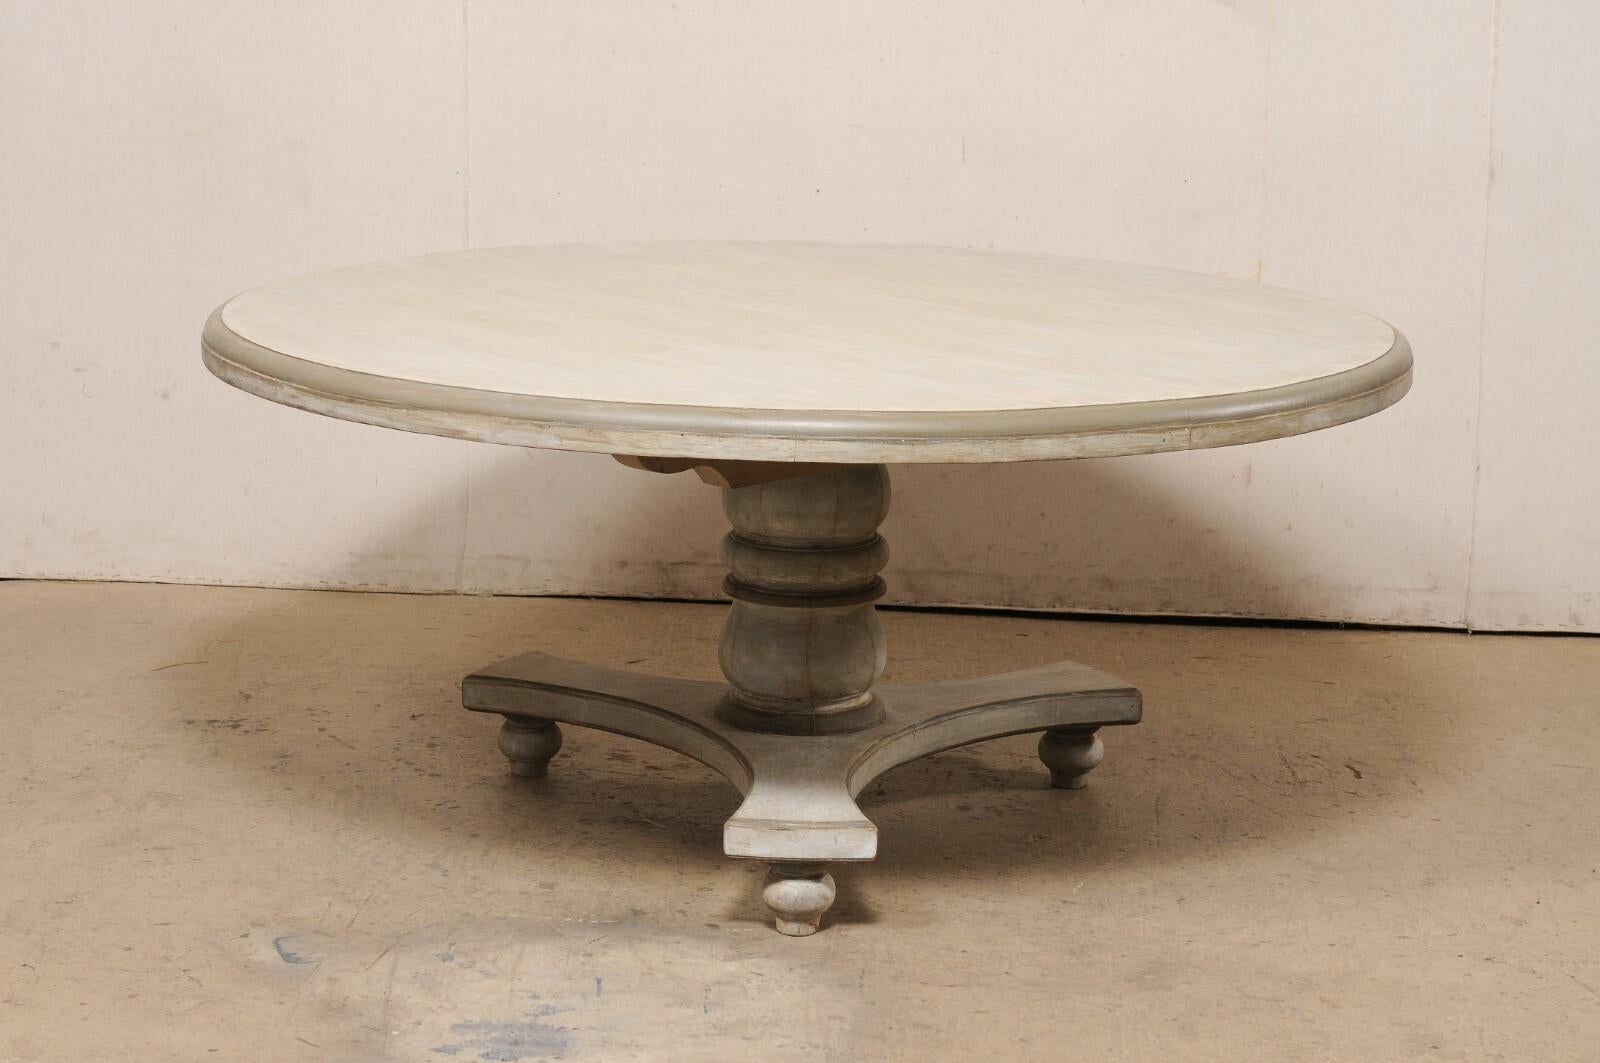 20th Century Painted Teak Round-Shaped Pedestal Dining Table, 5.5 Ft Diameter For Sale